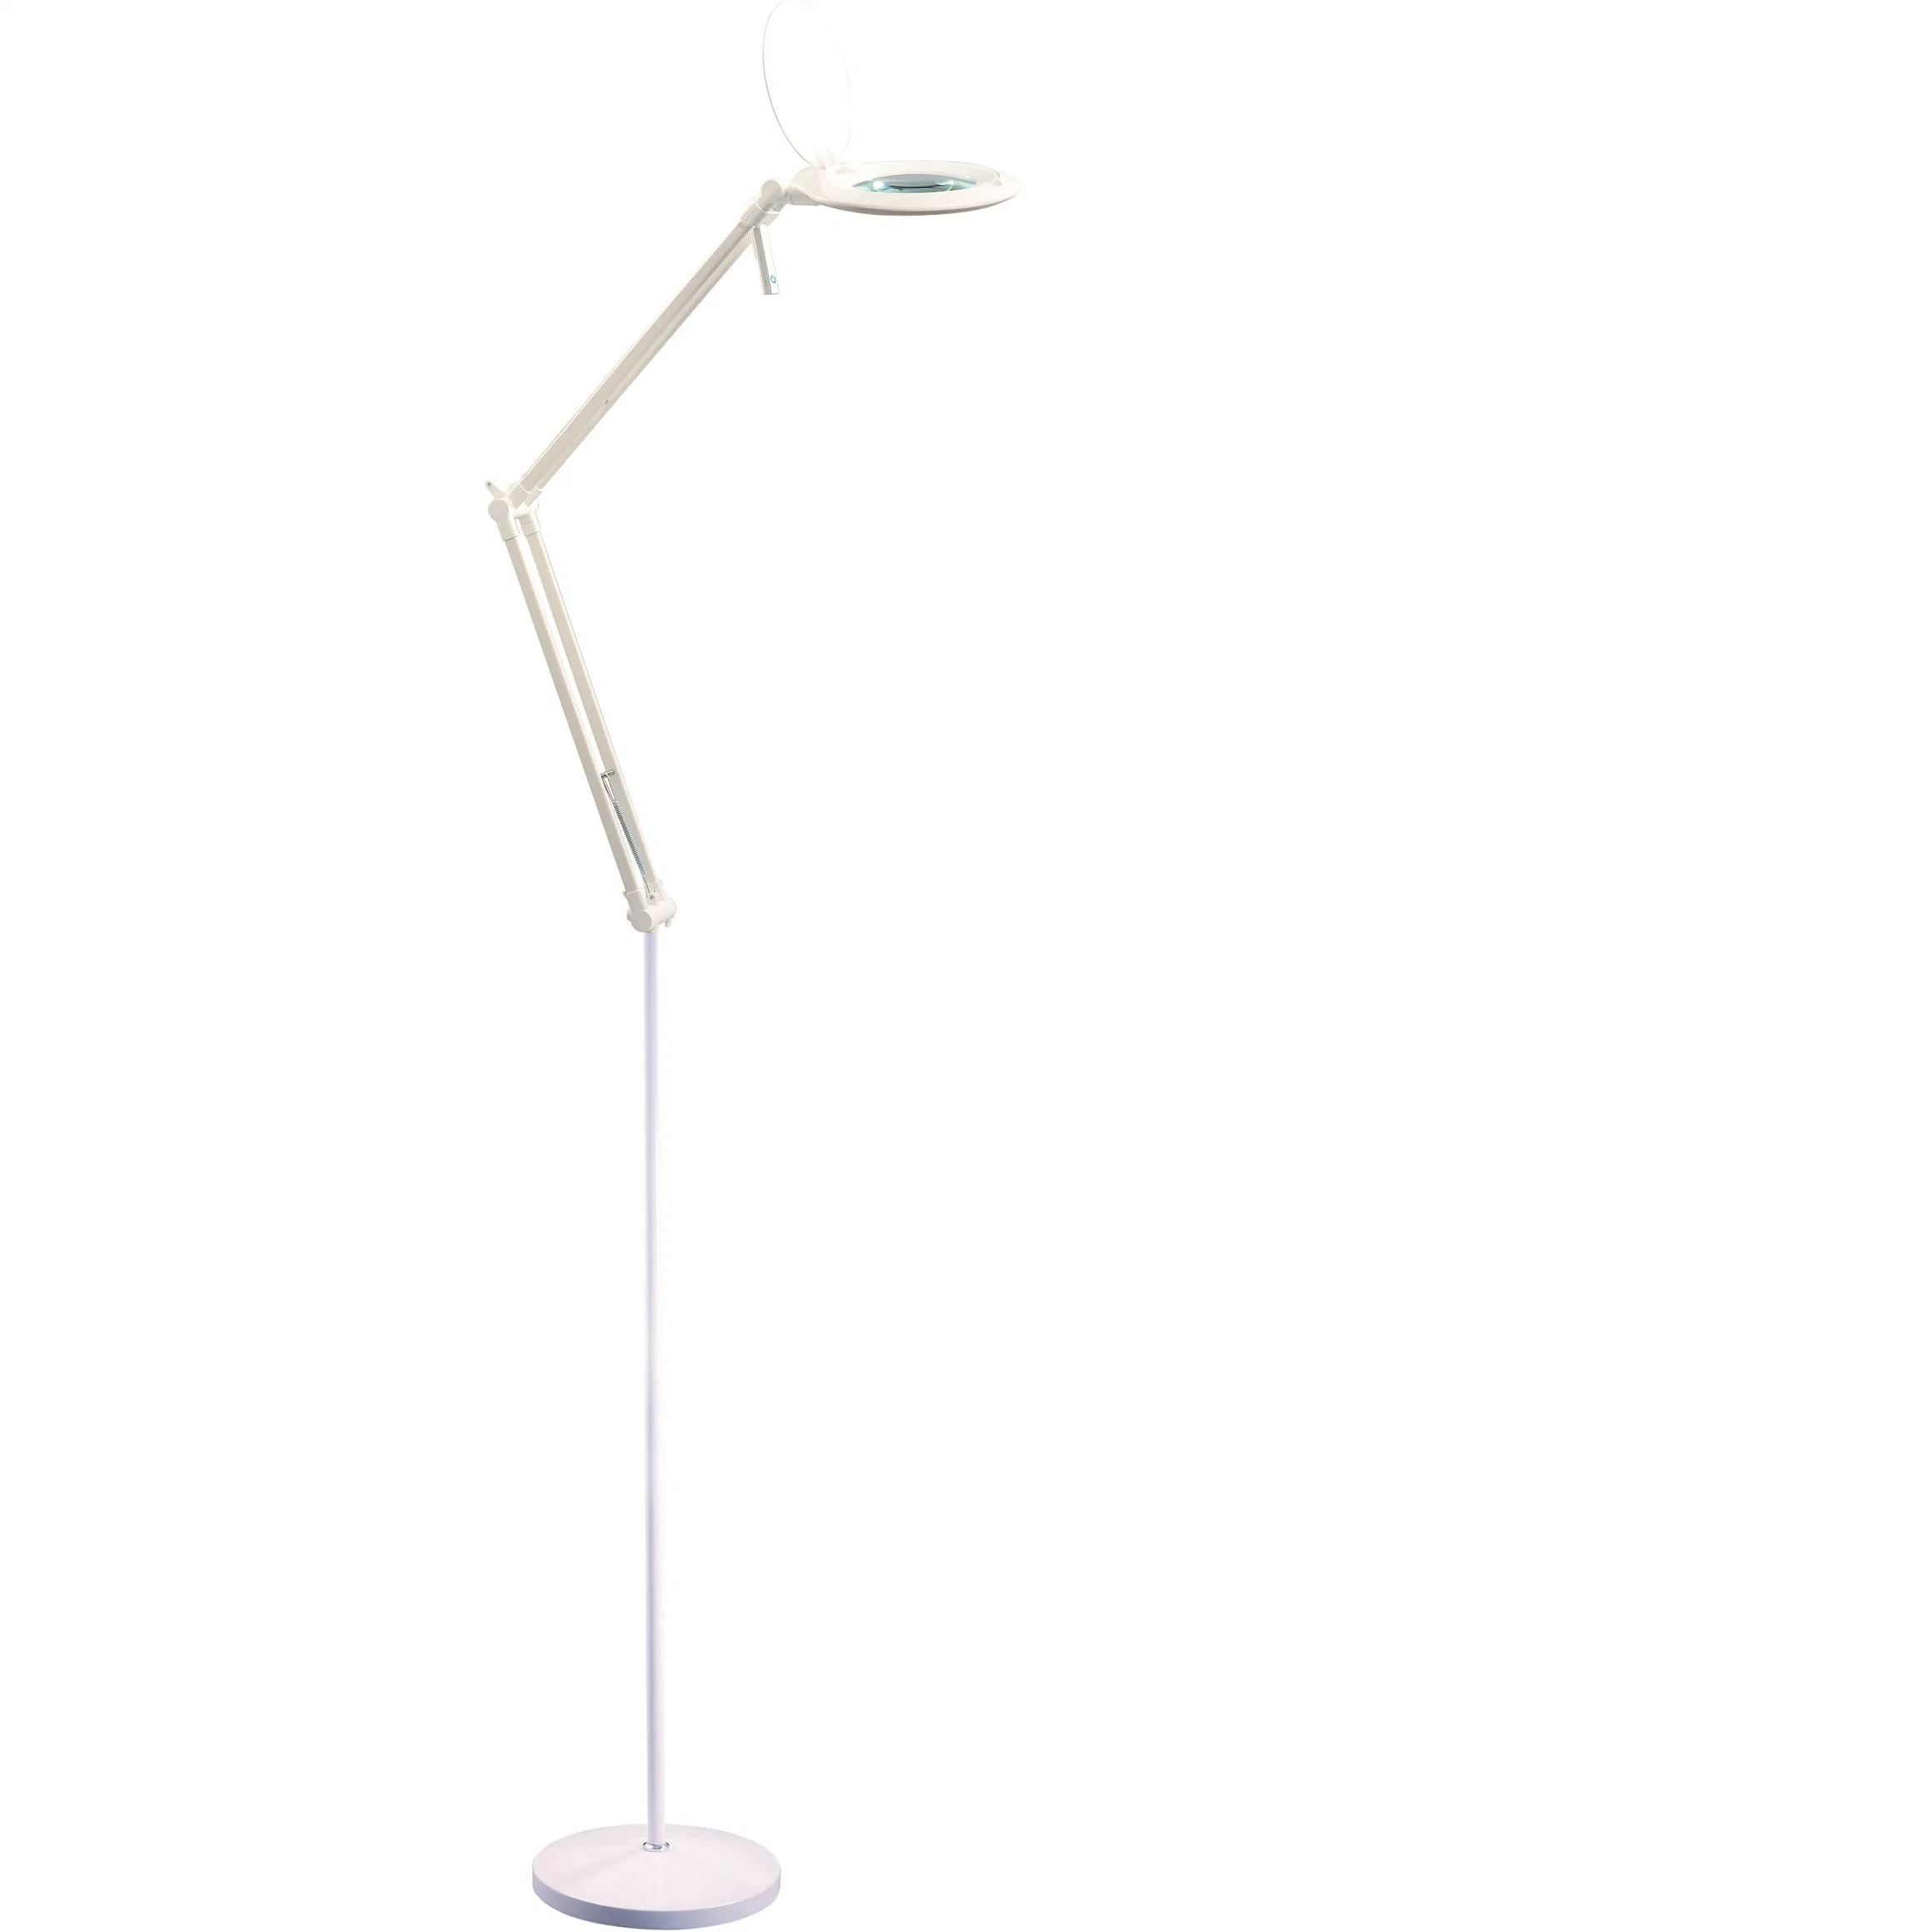 Dimmable LED Working Lamp Popular LED Beauty Lamp Cosmetic Pure Light Magnifying Lamp Dental Lamp